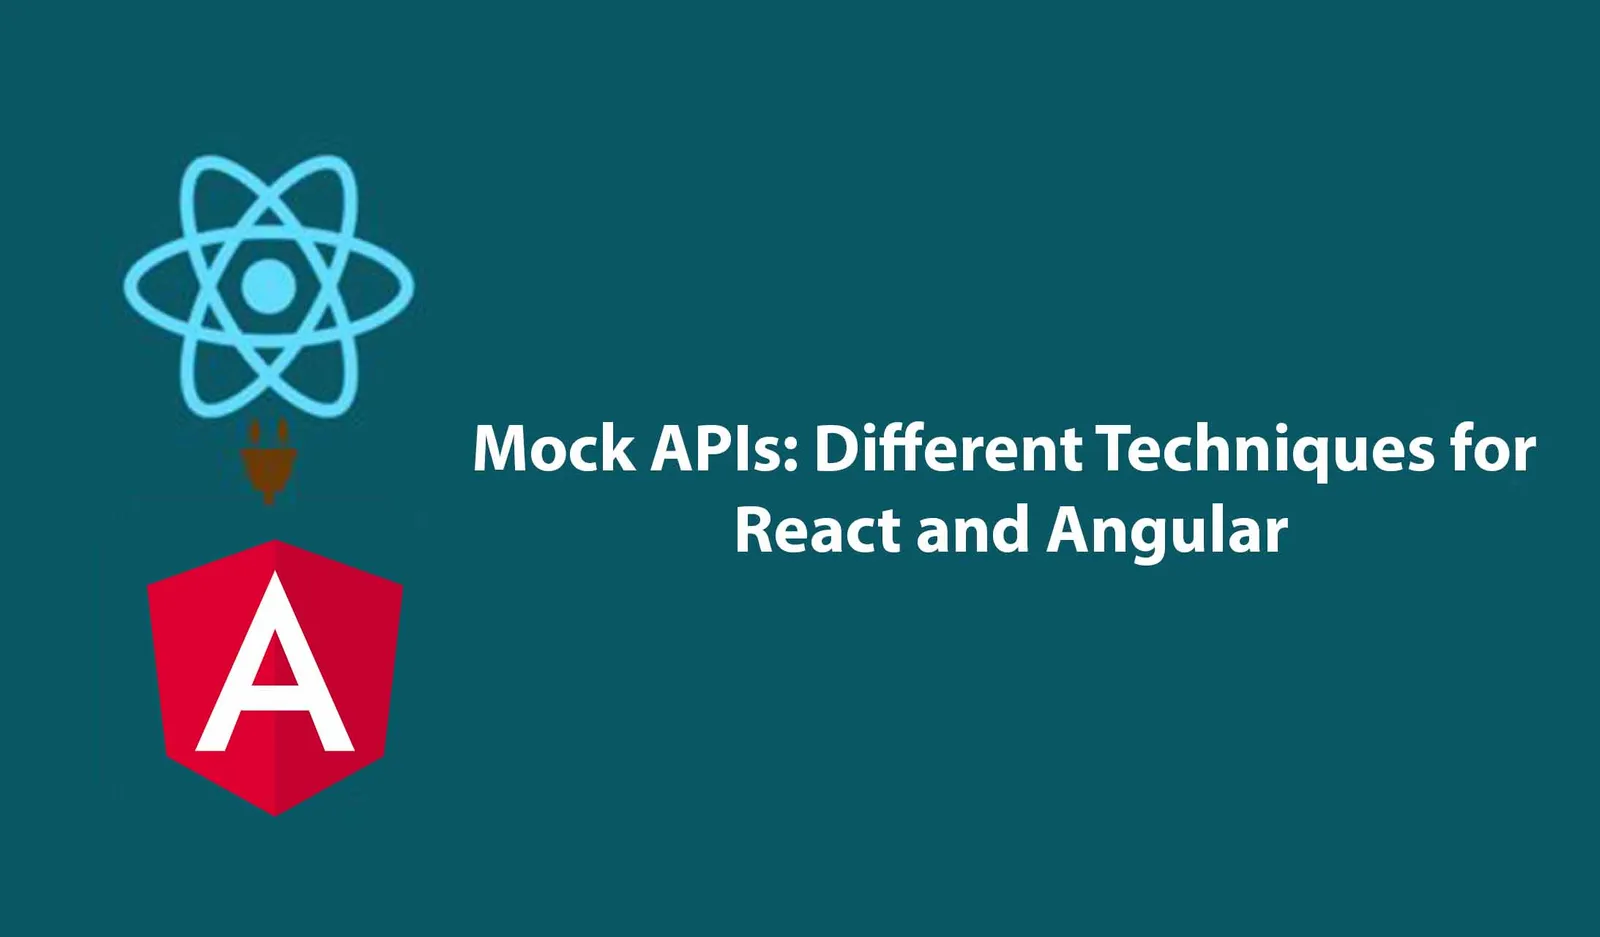 Mock APIs: Different Techniques for React and Angular